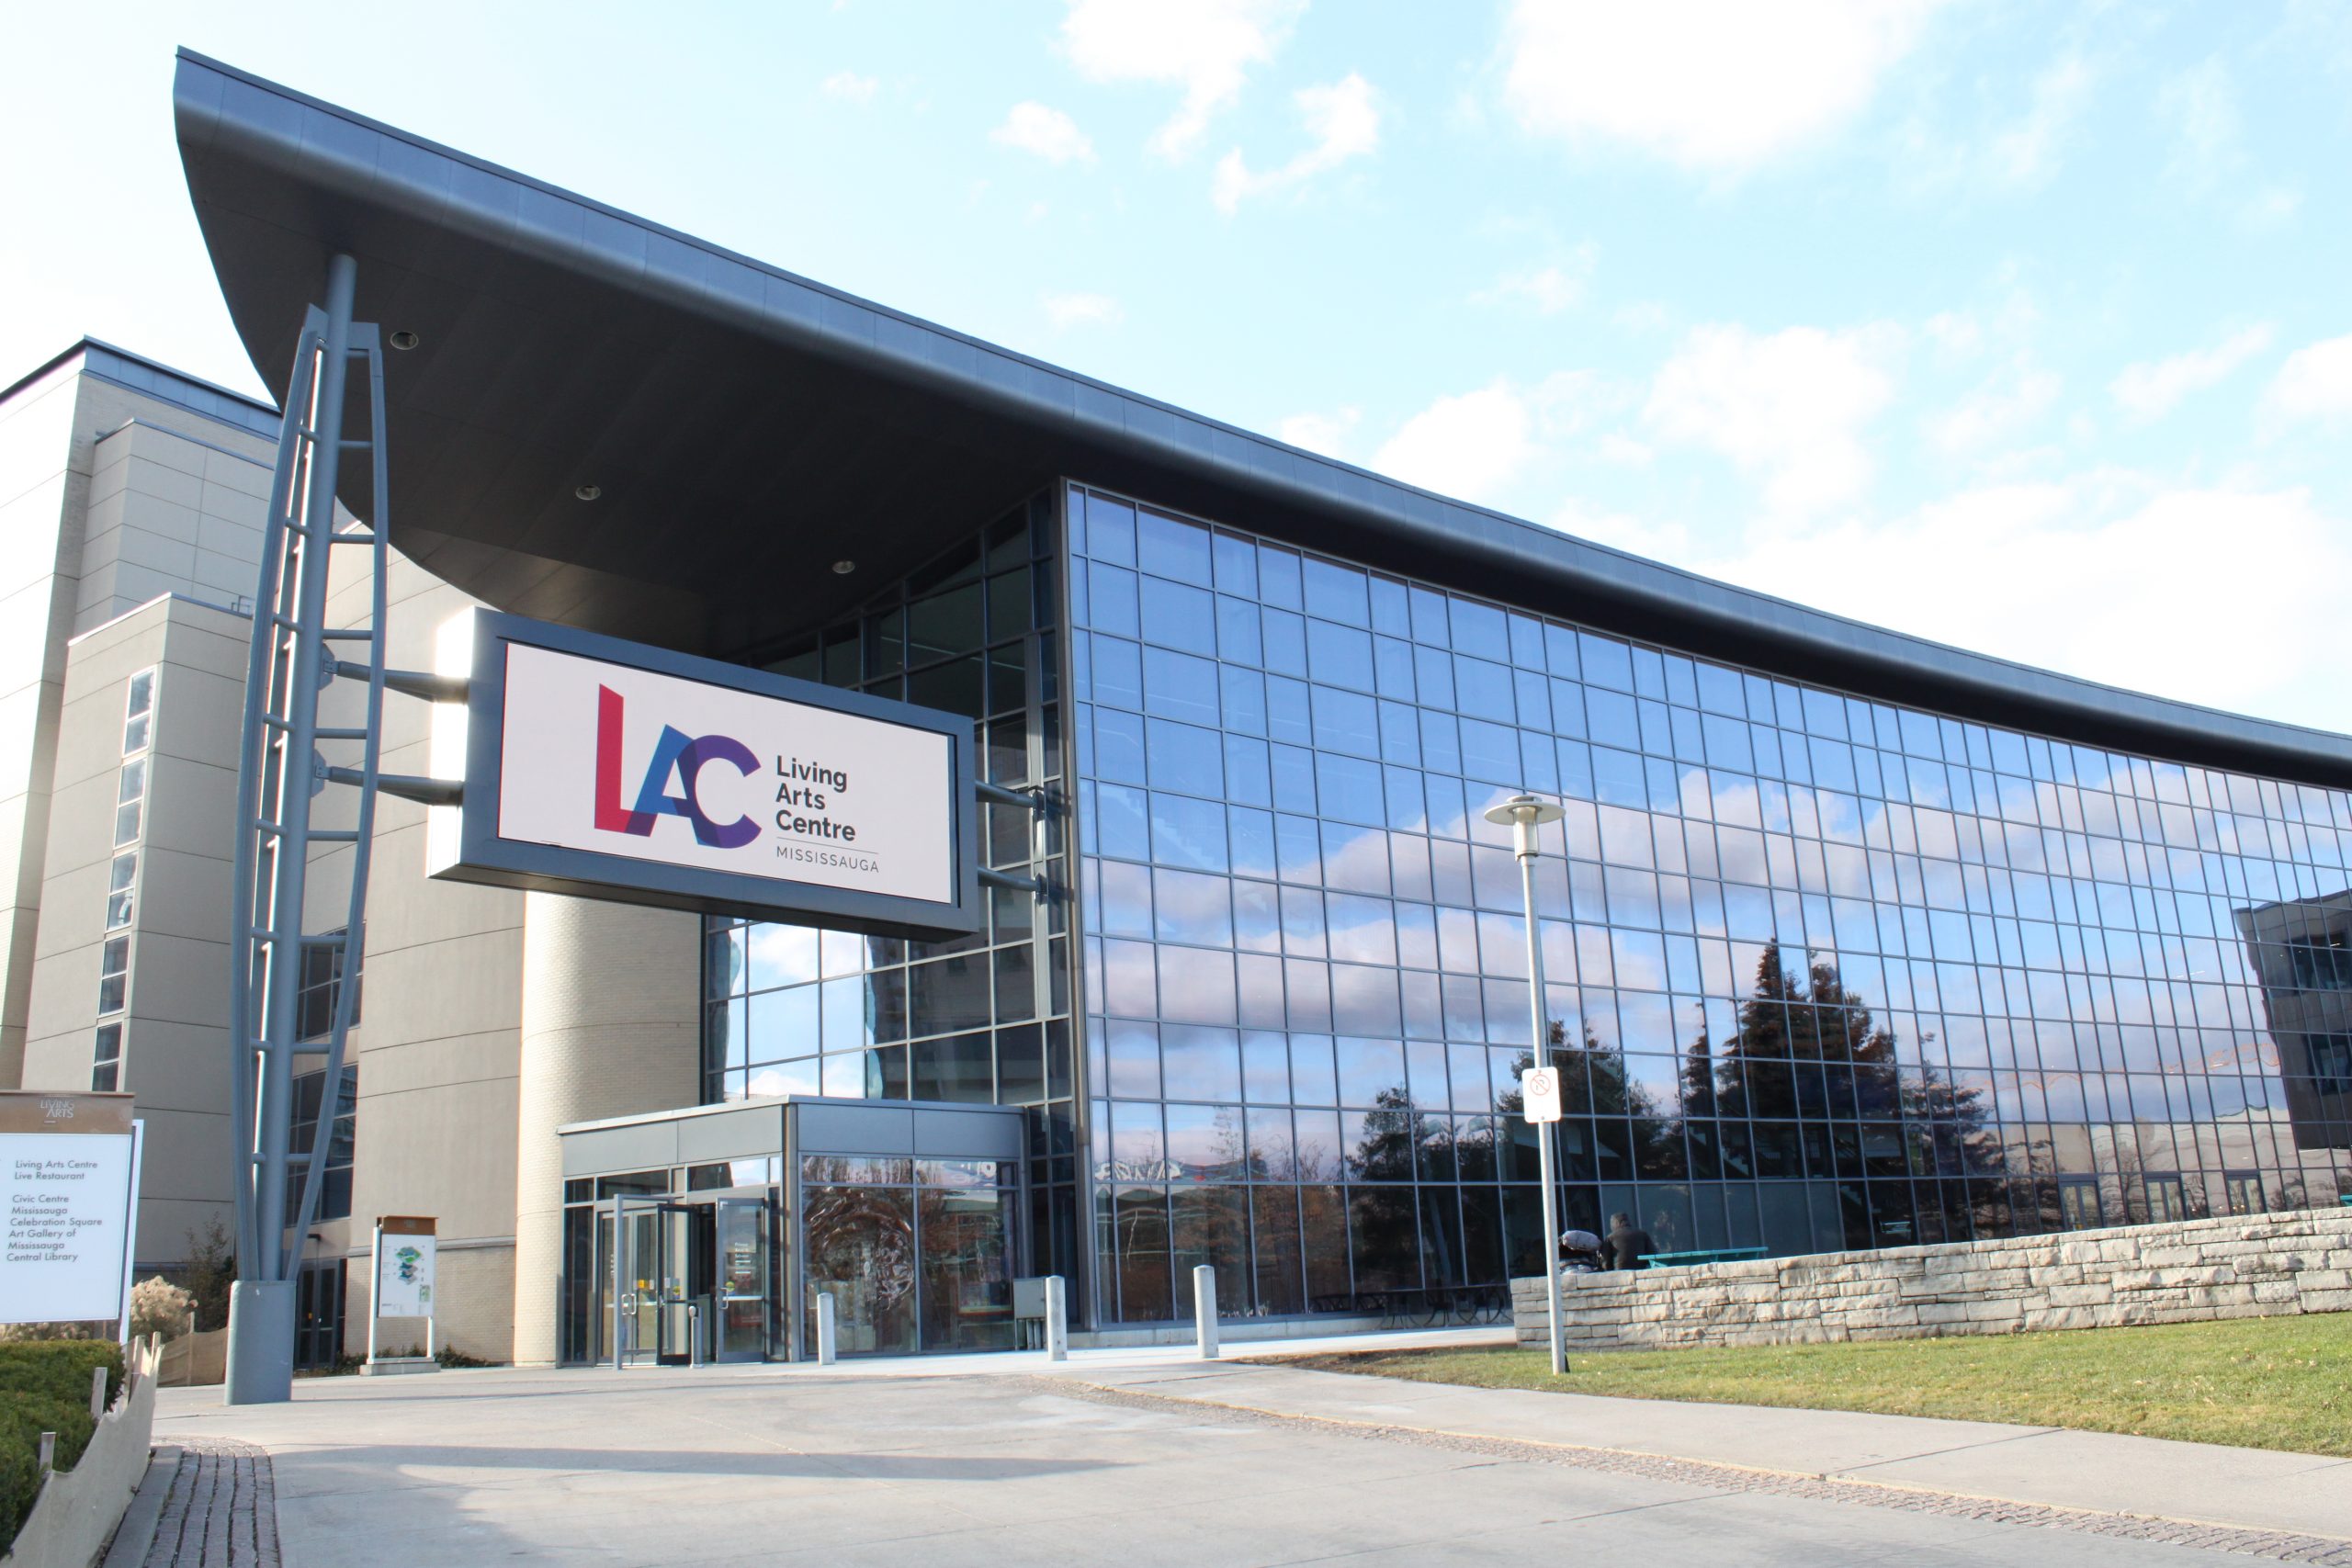 Exterior photo of the Living Arts Centre with mirrored glass and digital marquee sign Photo